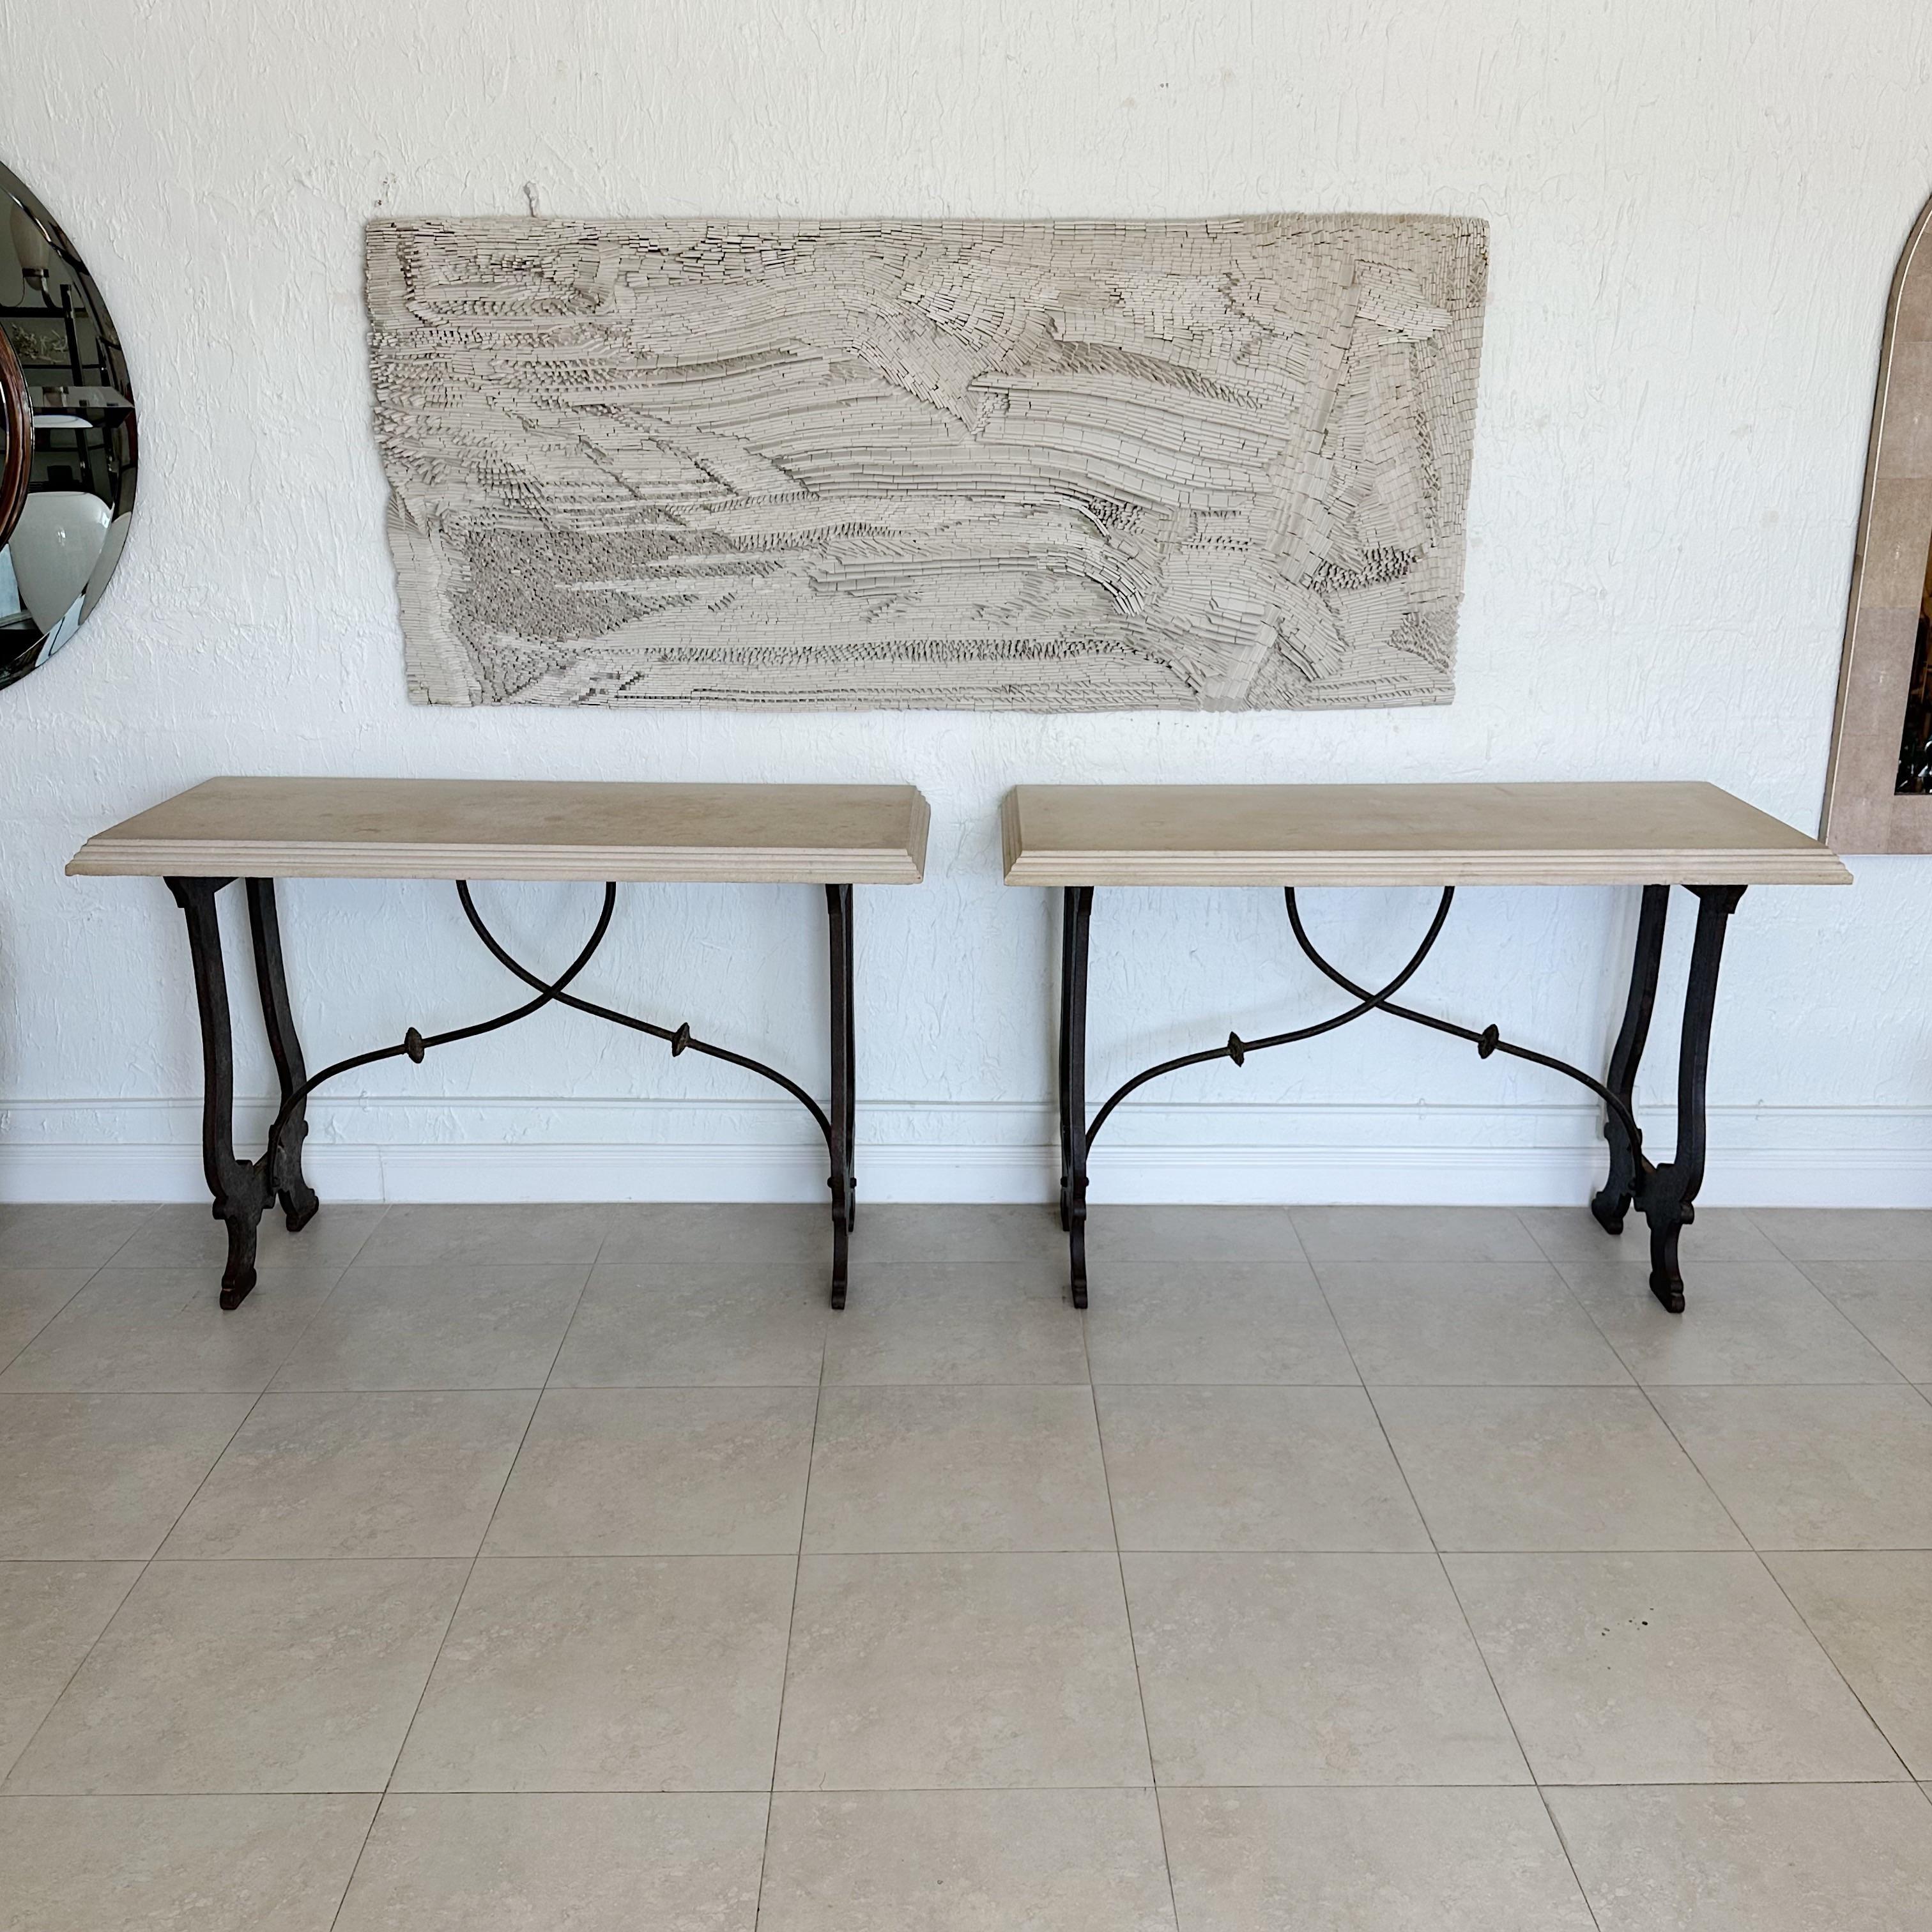 Pair of consoles tables that boast a sandstone top and iron harp-shaped support ends. This table is connected by wrought iron supports that add to its unique appearance. These stunning pieces are inspired by 18th century design. The sandstone tops